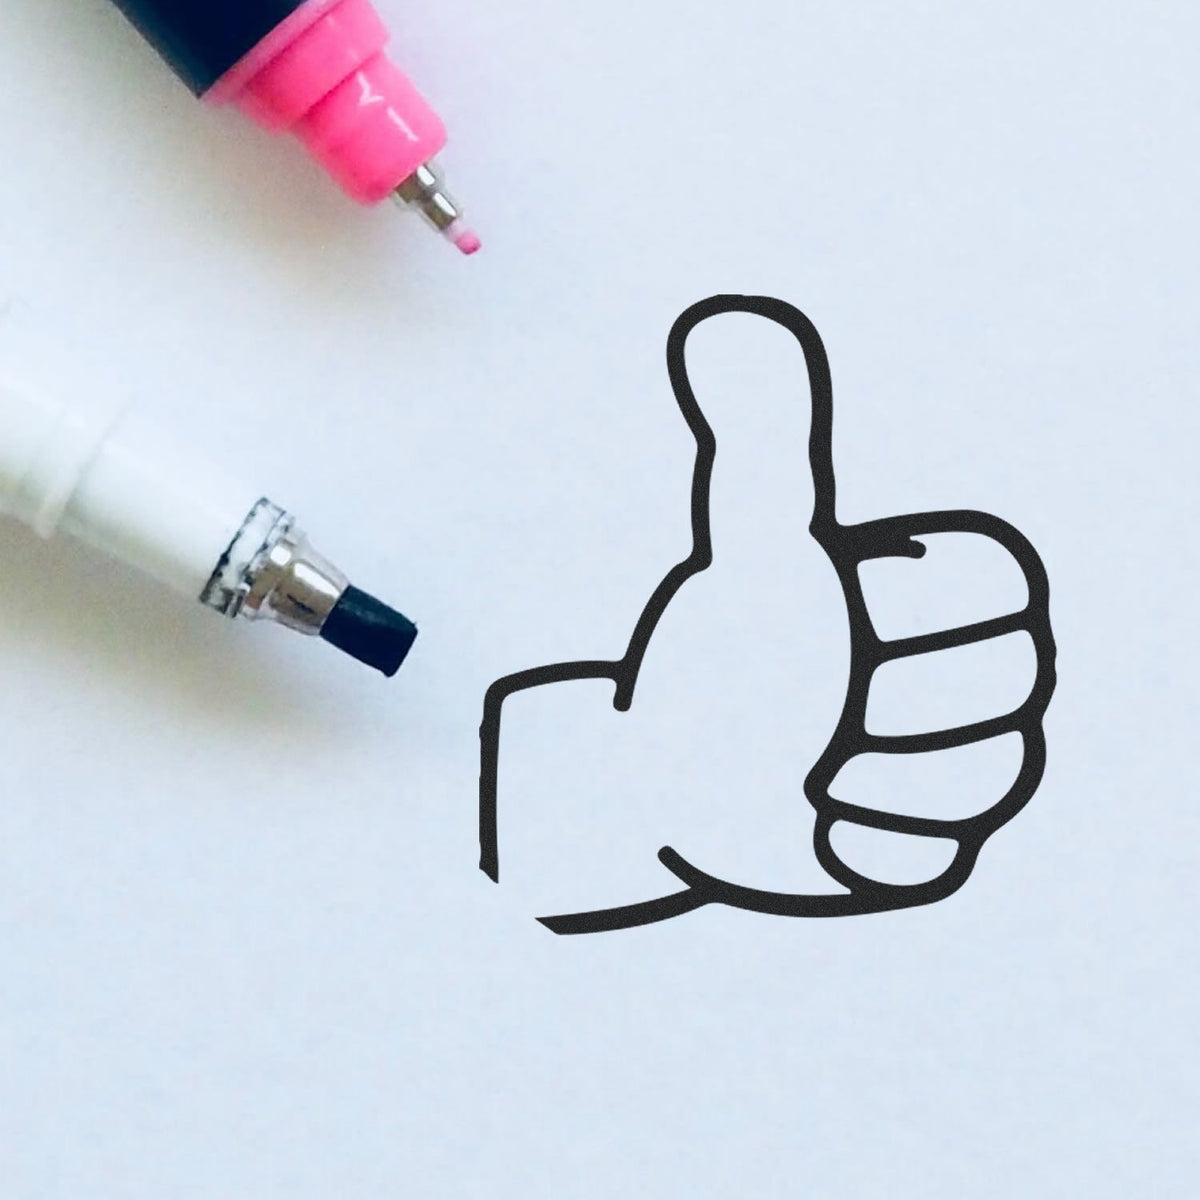 Round Thumbs Up Rubber Stamp Lifestyle Photo